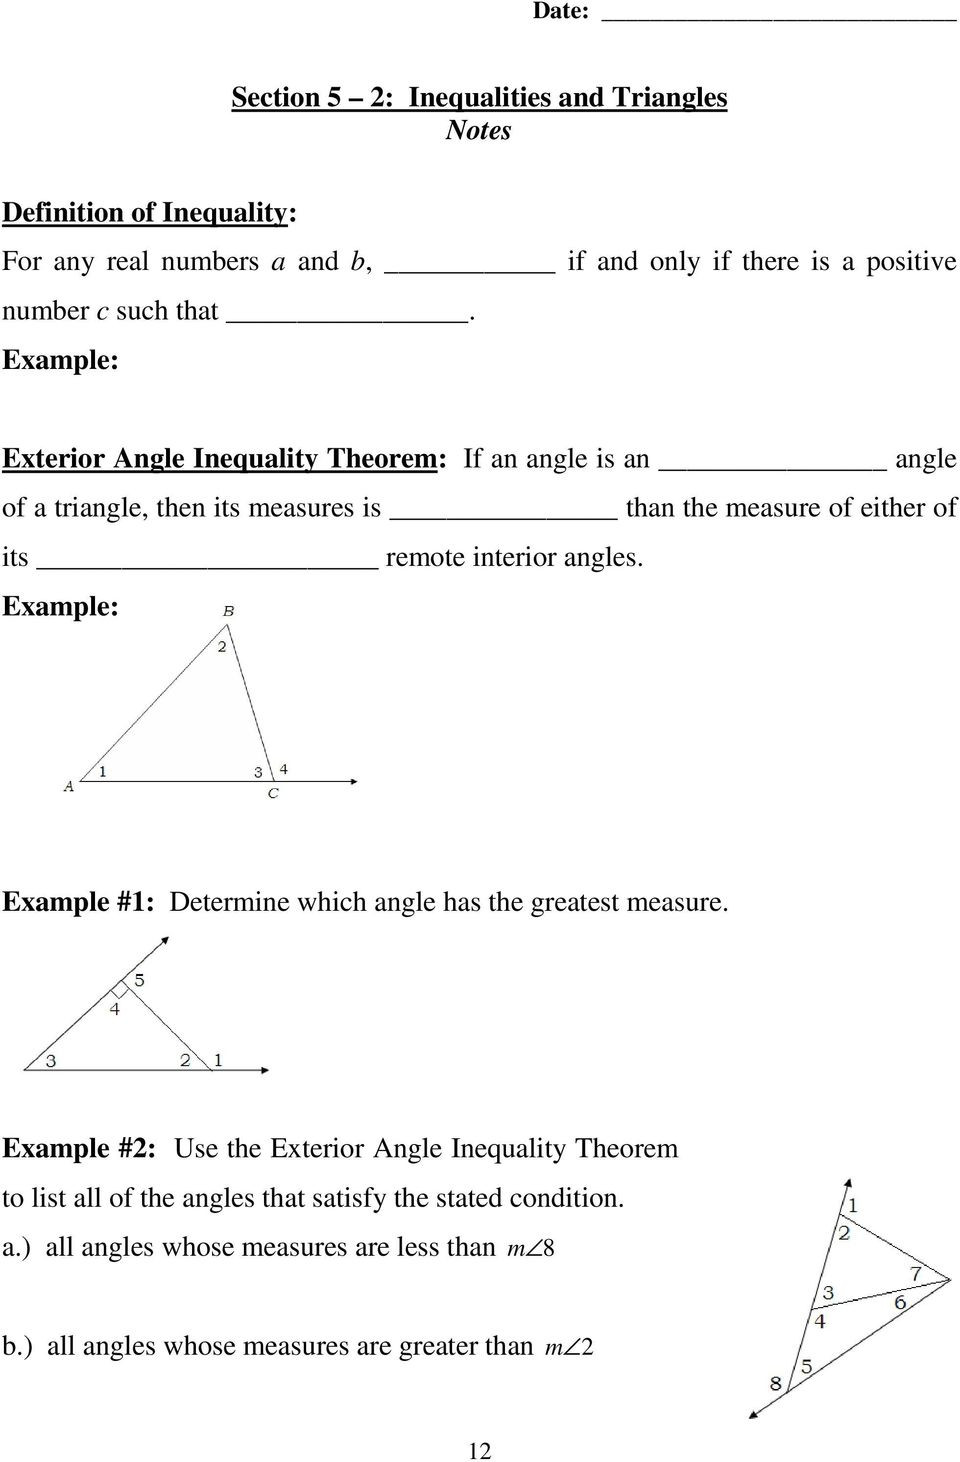 Triangle Inequality theorem Worksheet Geometry Relationships In Triangles Unit 5 Name Pdf